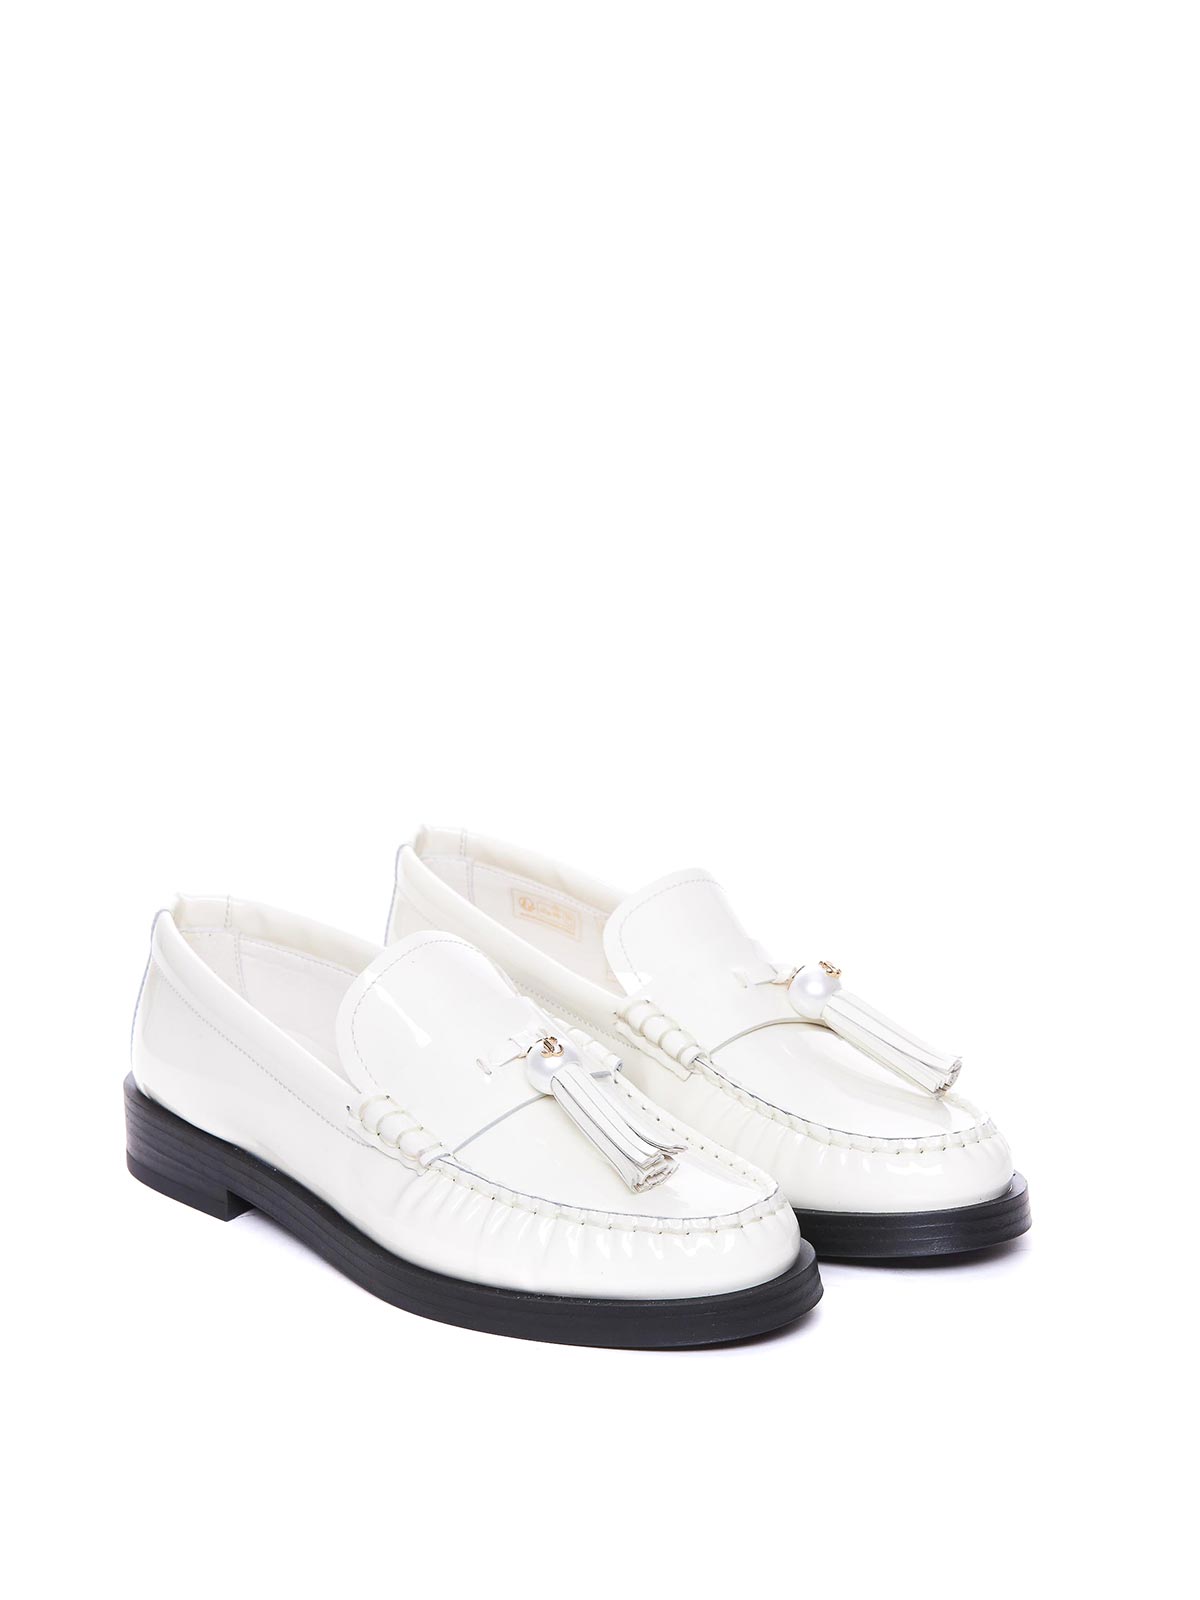 Shop Jimmy Choo White Addie Loafers Round Toe